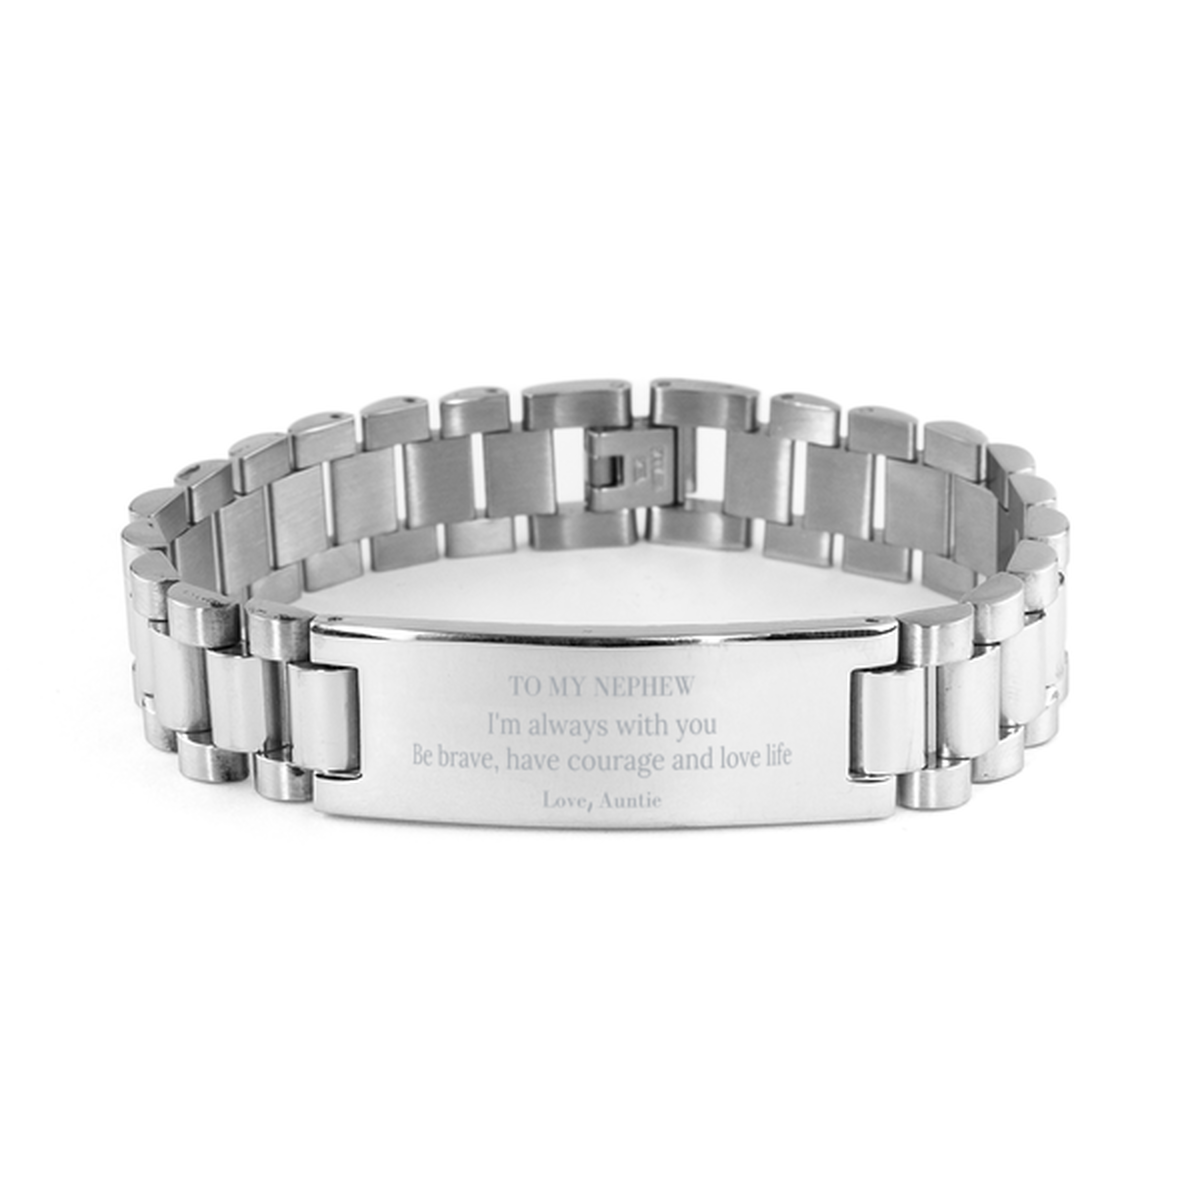 To My Nephew Gifts from Auntie, Unique Ladder Stainless Steel Bracelet Inspirational Christmas Birthday Graduation Gifts for Nephew I'm always with you. Be brave, have courage and love life. Love, Auntie